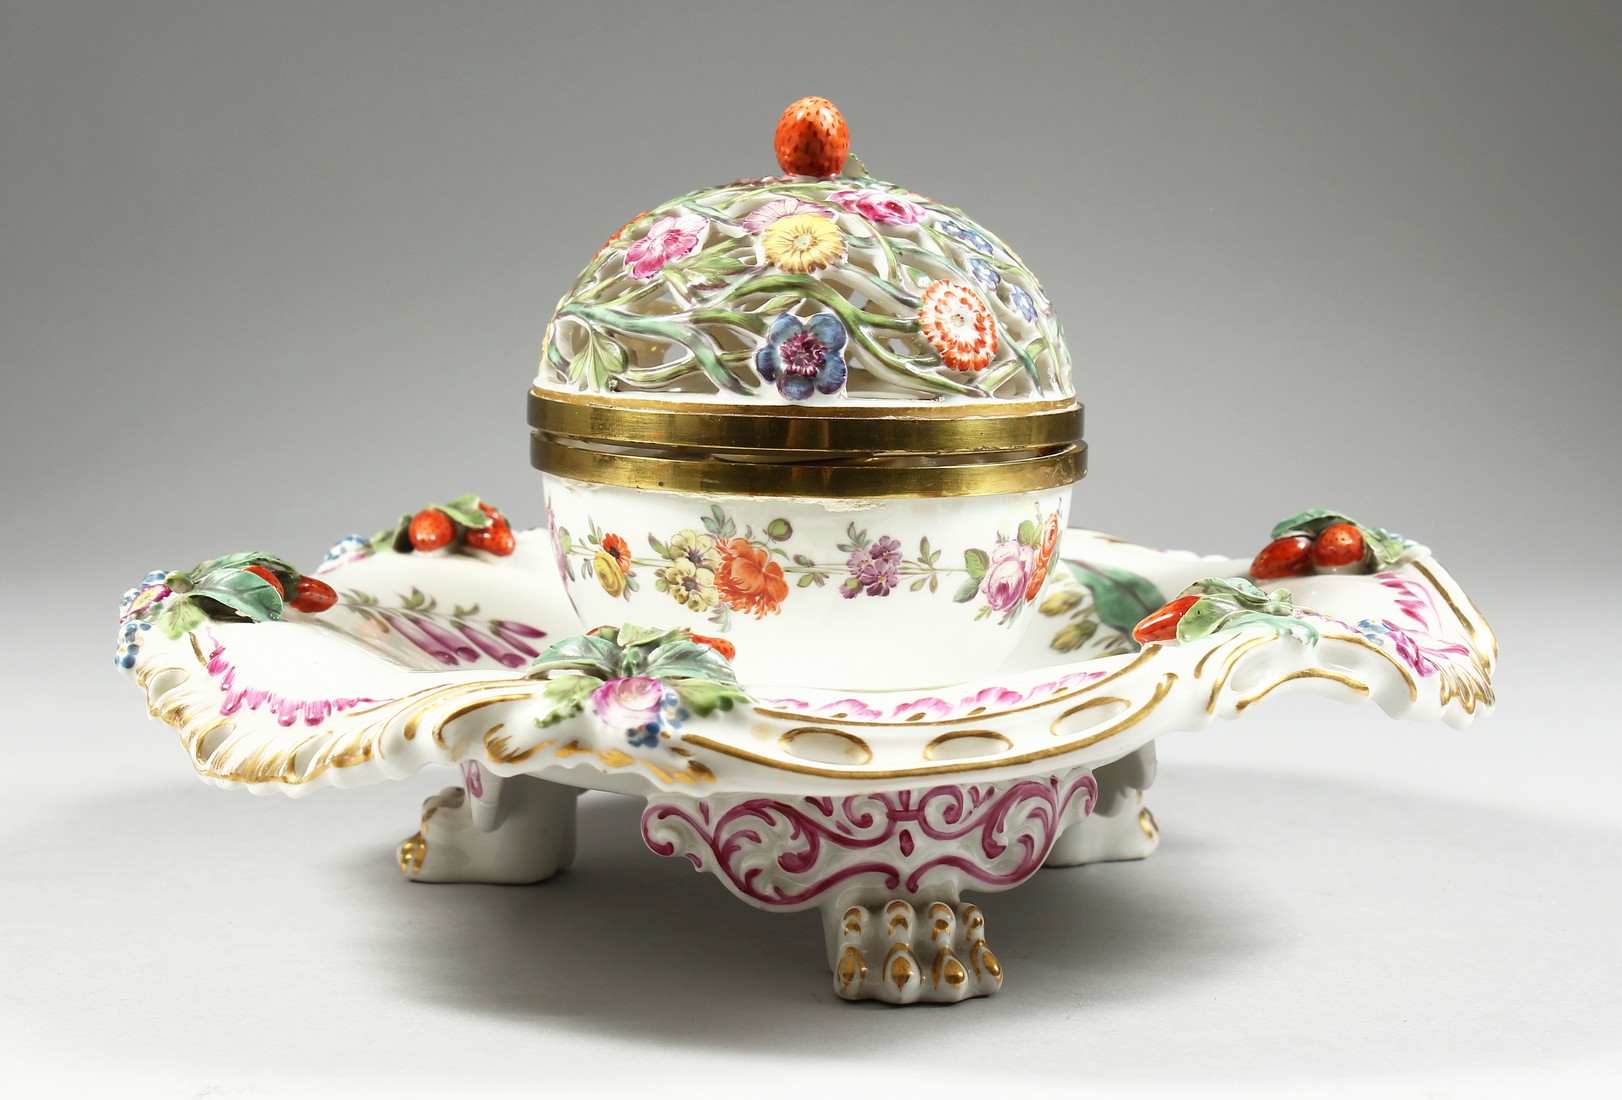 A GOOD 19TH CENTURY CONTINENTAL PORCELAIN CIRCULAR INKSTAND with pierced floral top, painted with